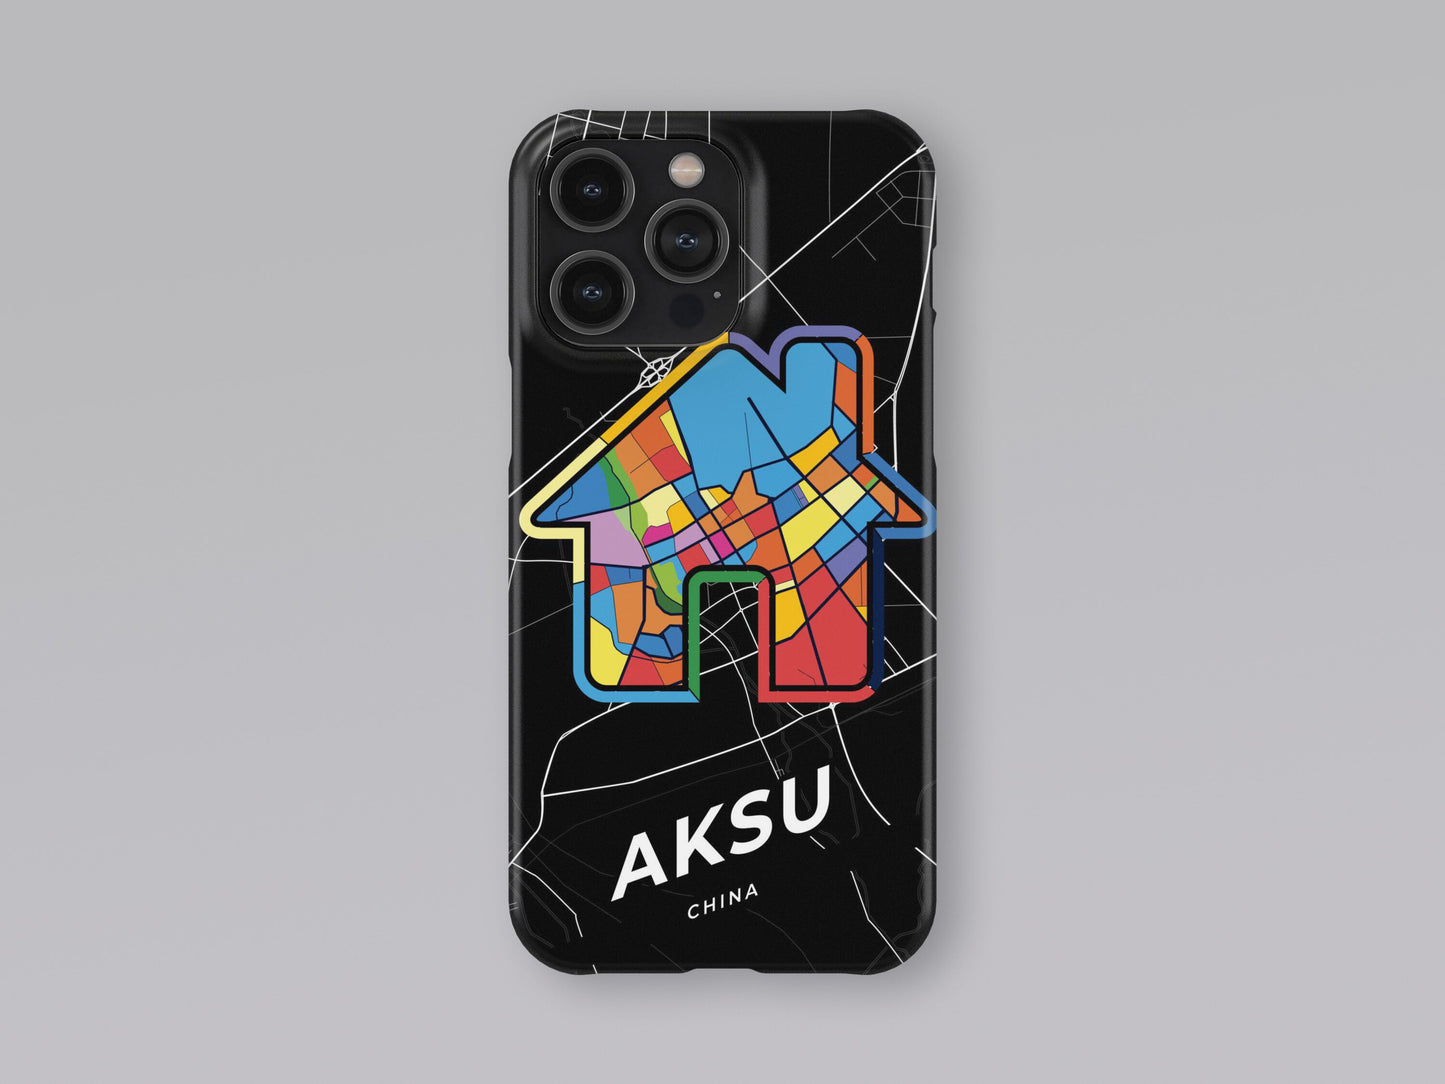 Aksu China slim phone case with colorful icon. Birthday, wedding or housewarming gift. Couple match cases. 3